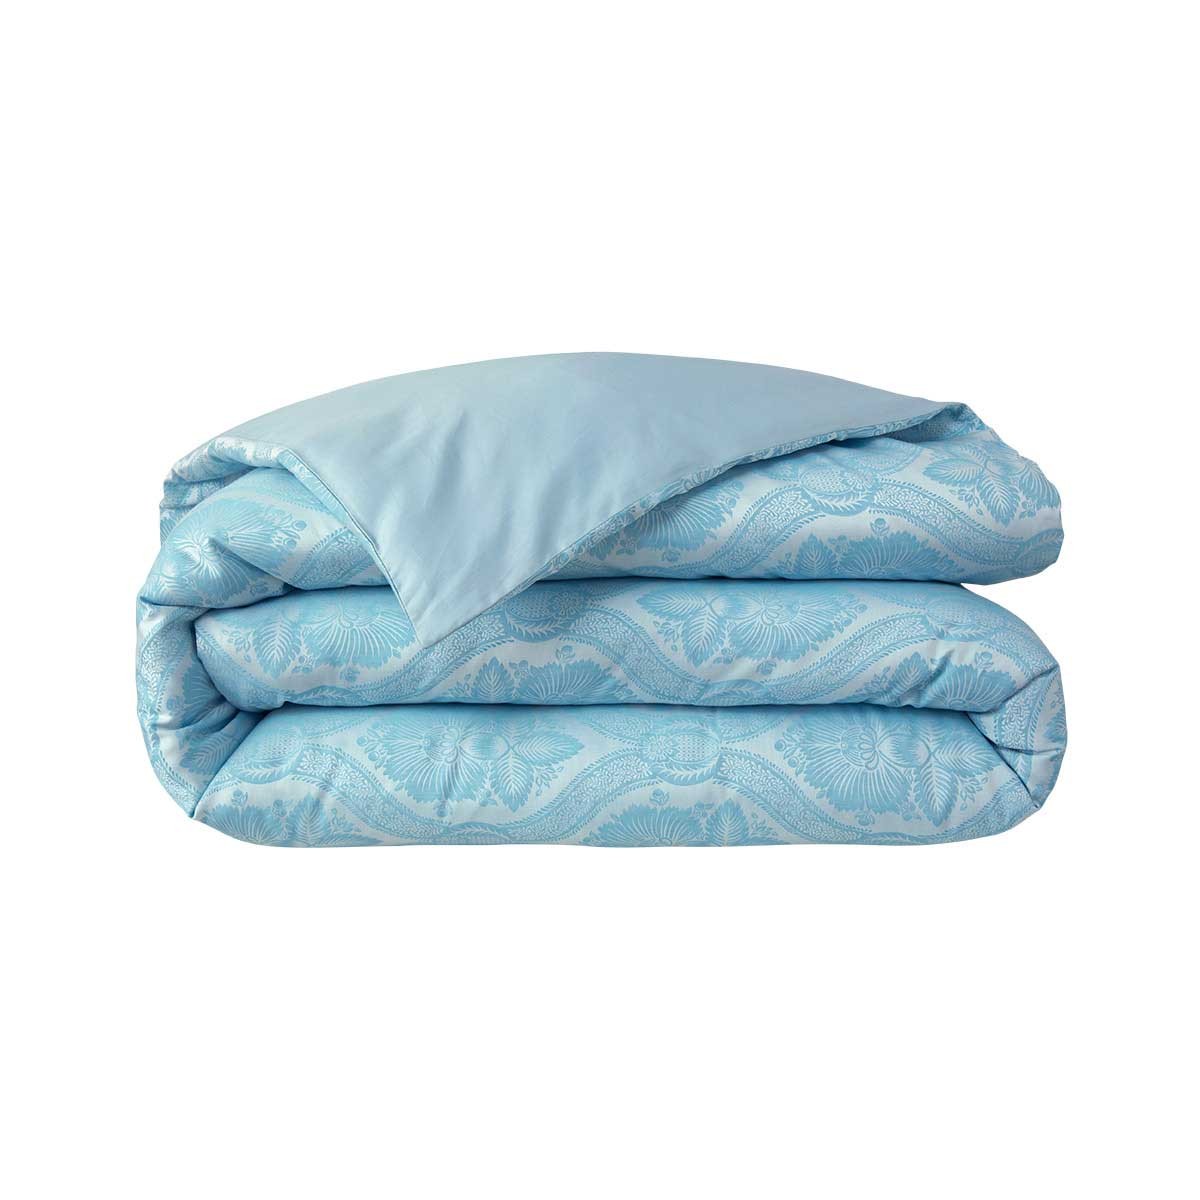 Yves Delorme Nil Bleu Bed Embrace Tranquility | Collection